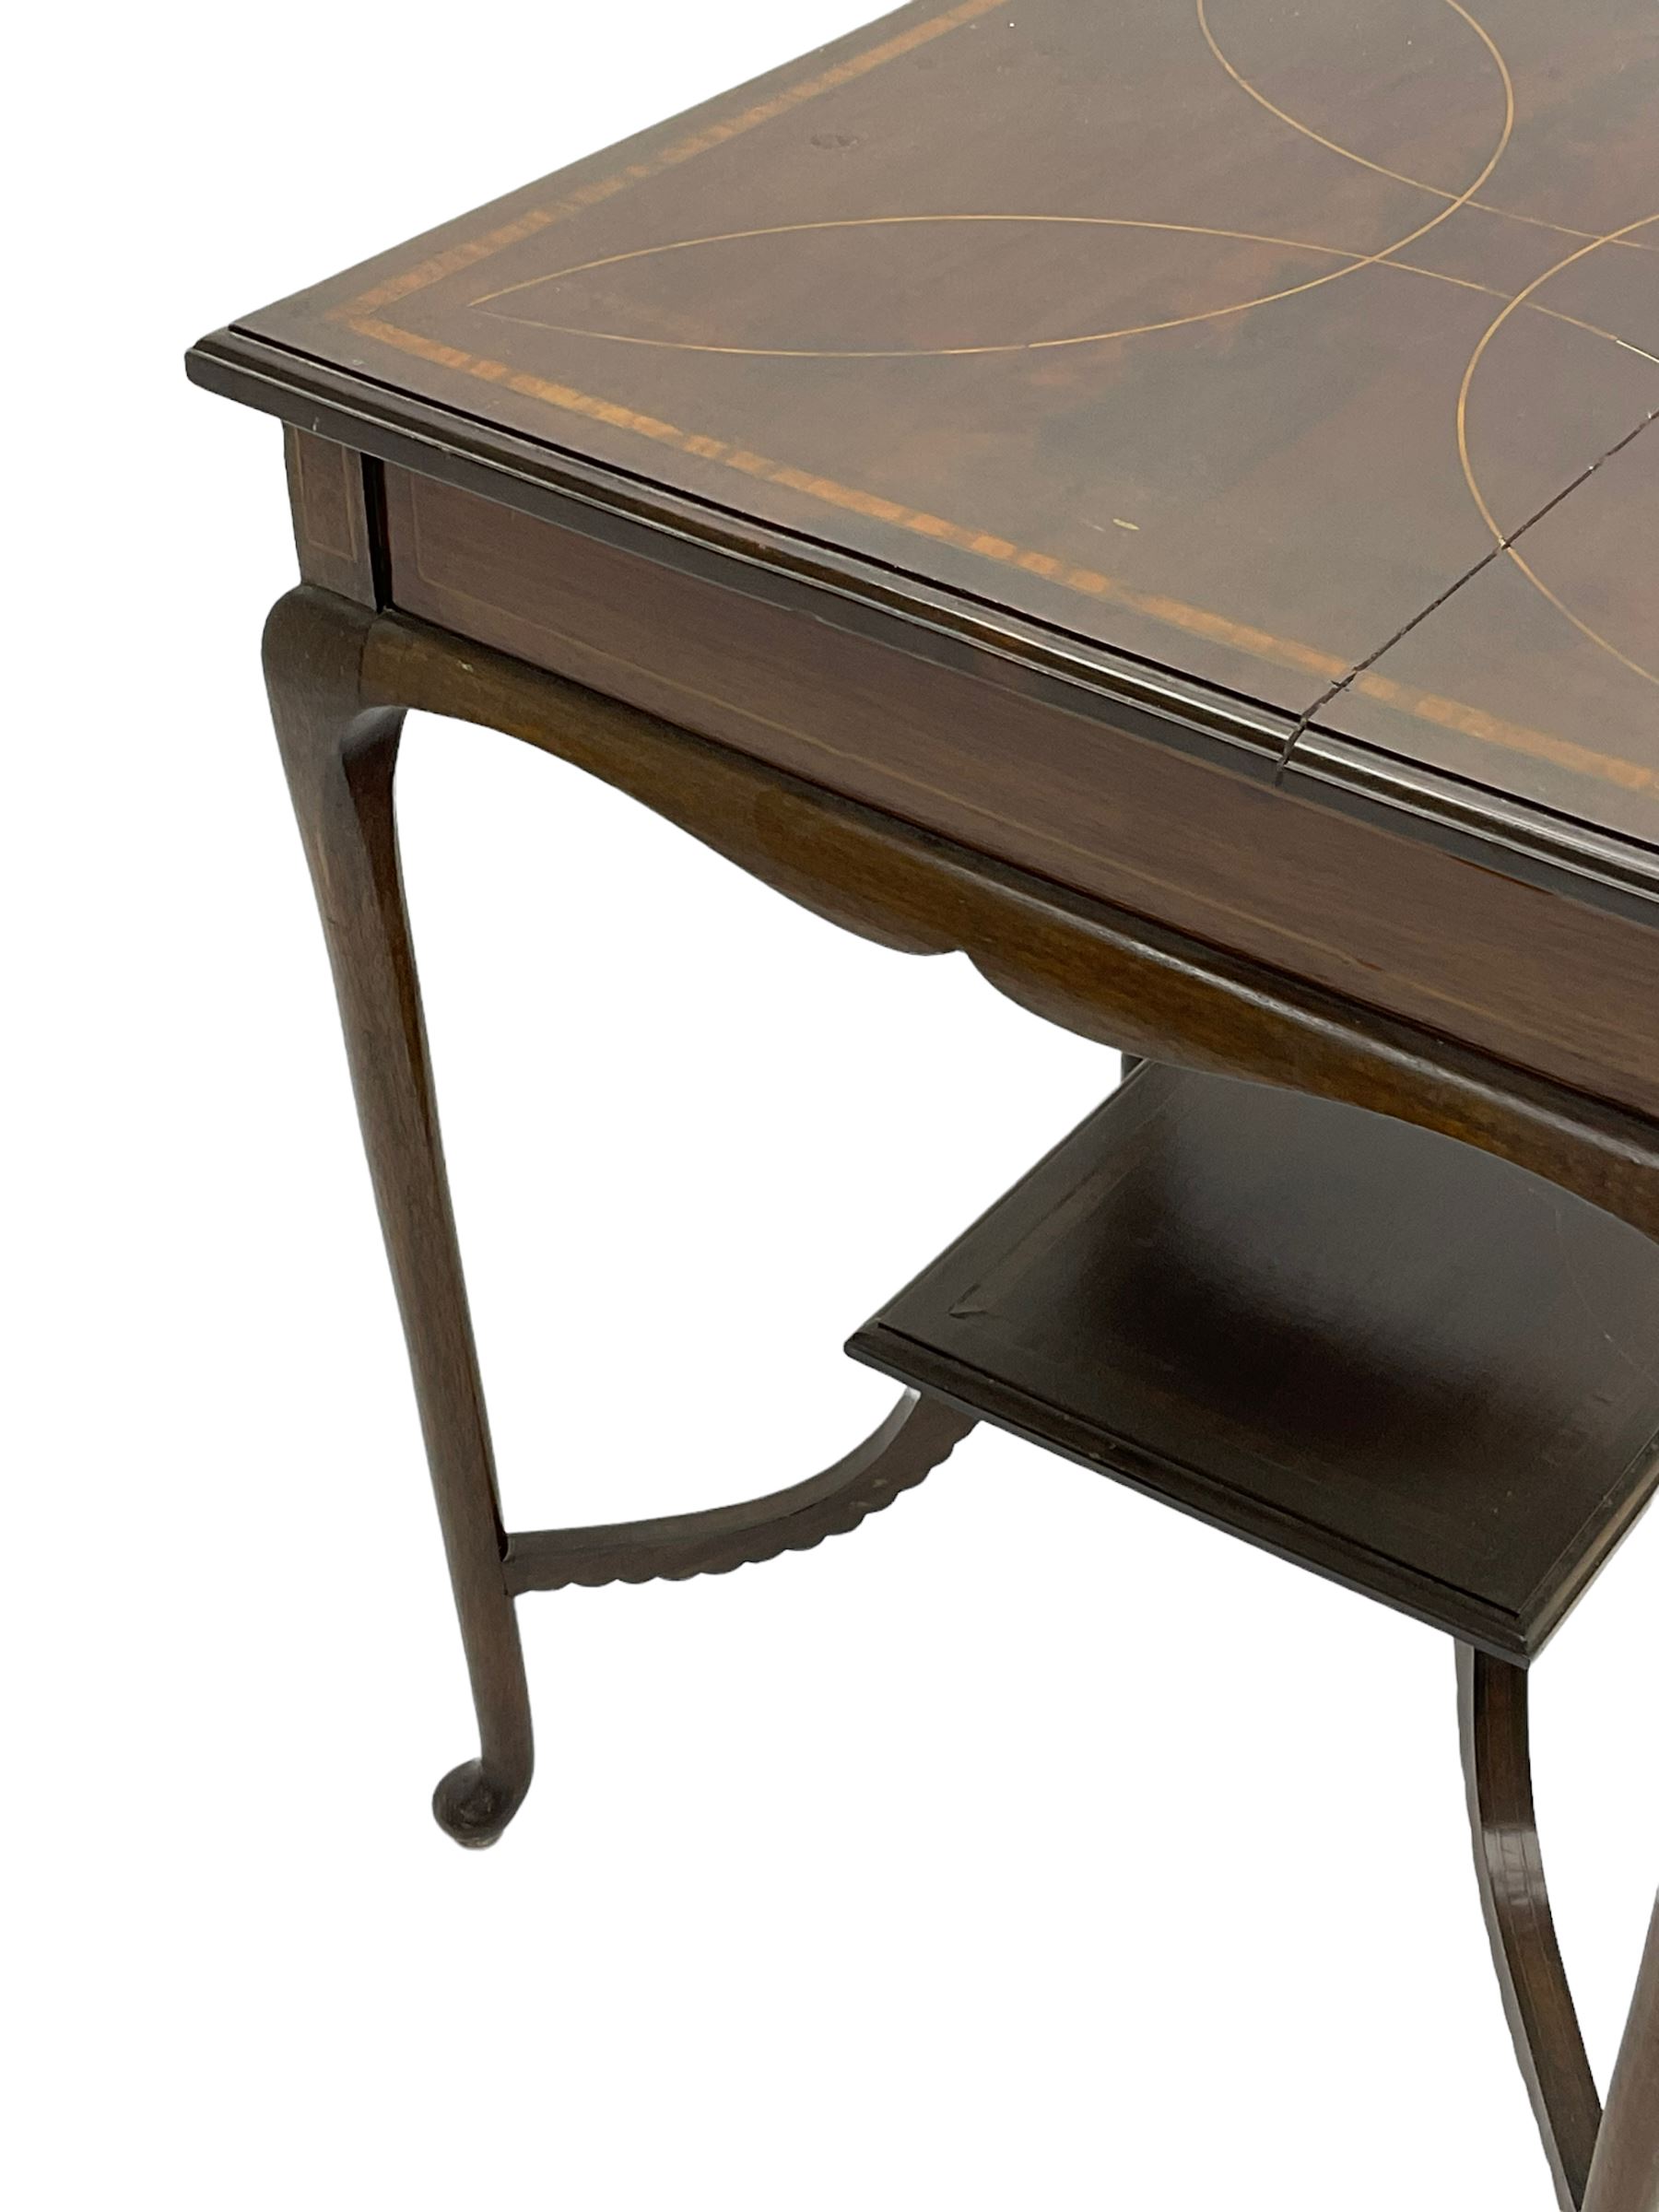 Edwardian inlaid mahogany square occasional table - Image 2 of 4